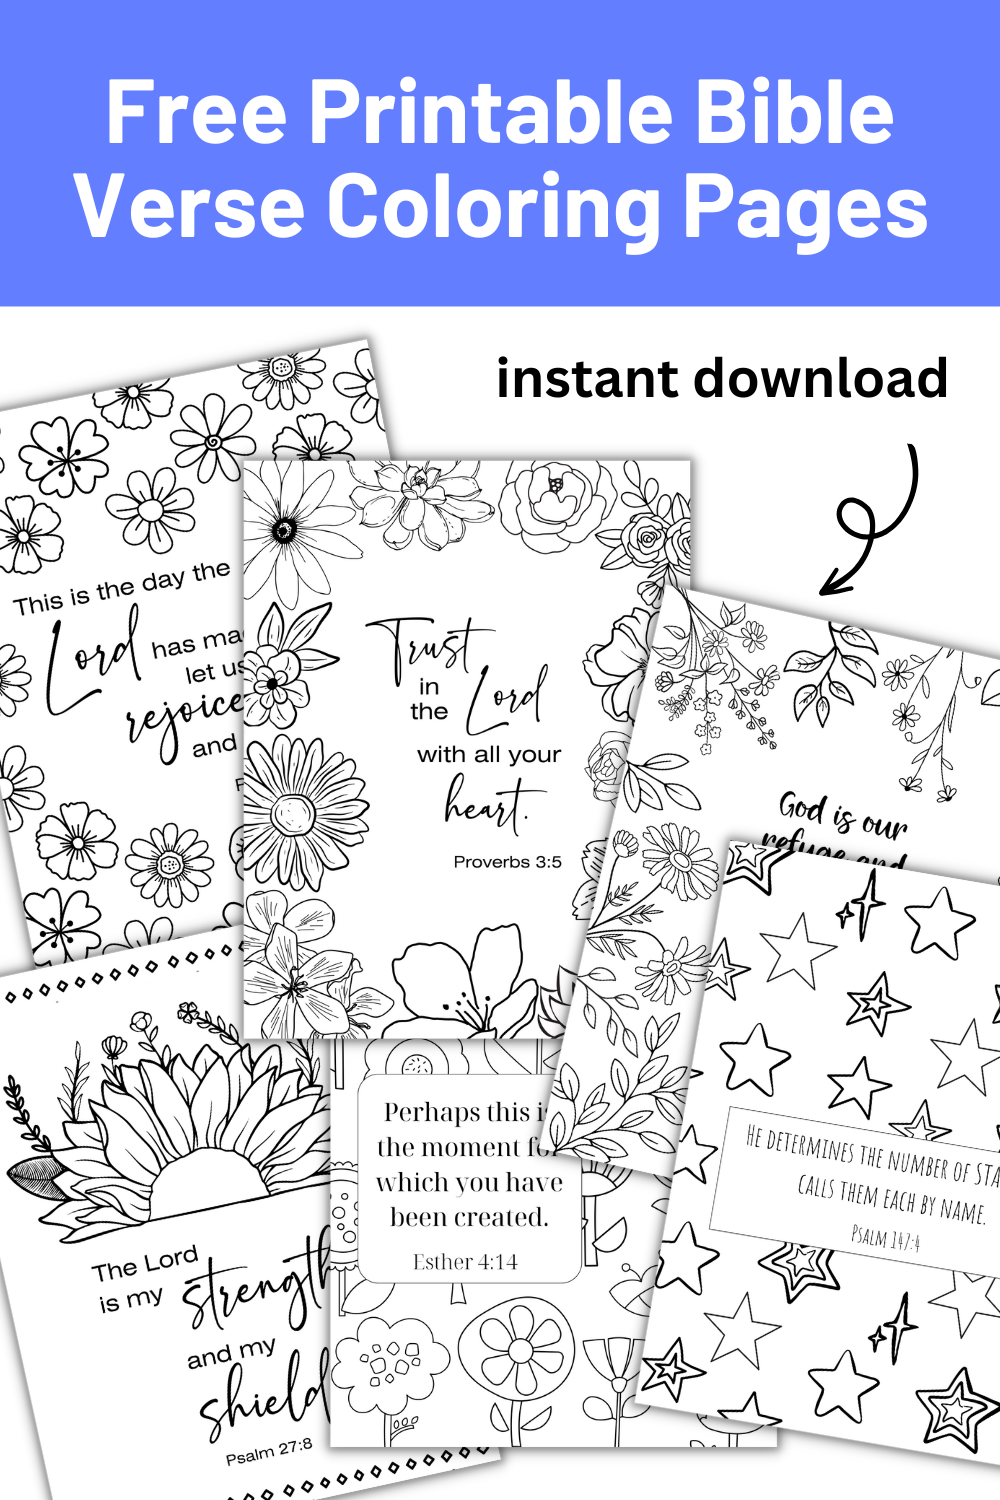 Free Printable Bible Verse Coloring Pages - Out Upon the Waters